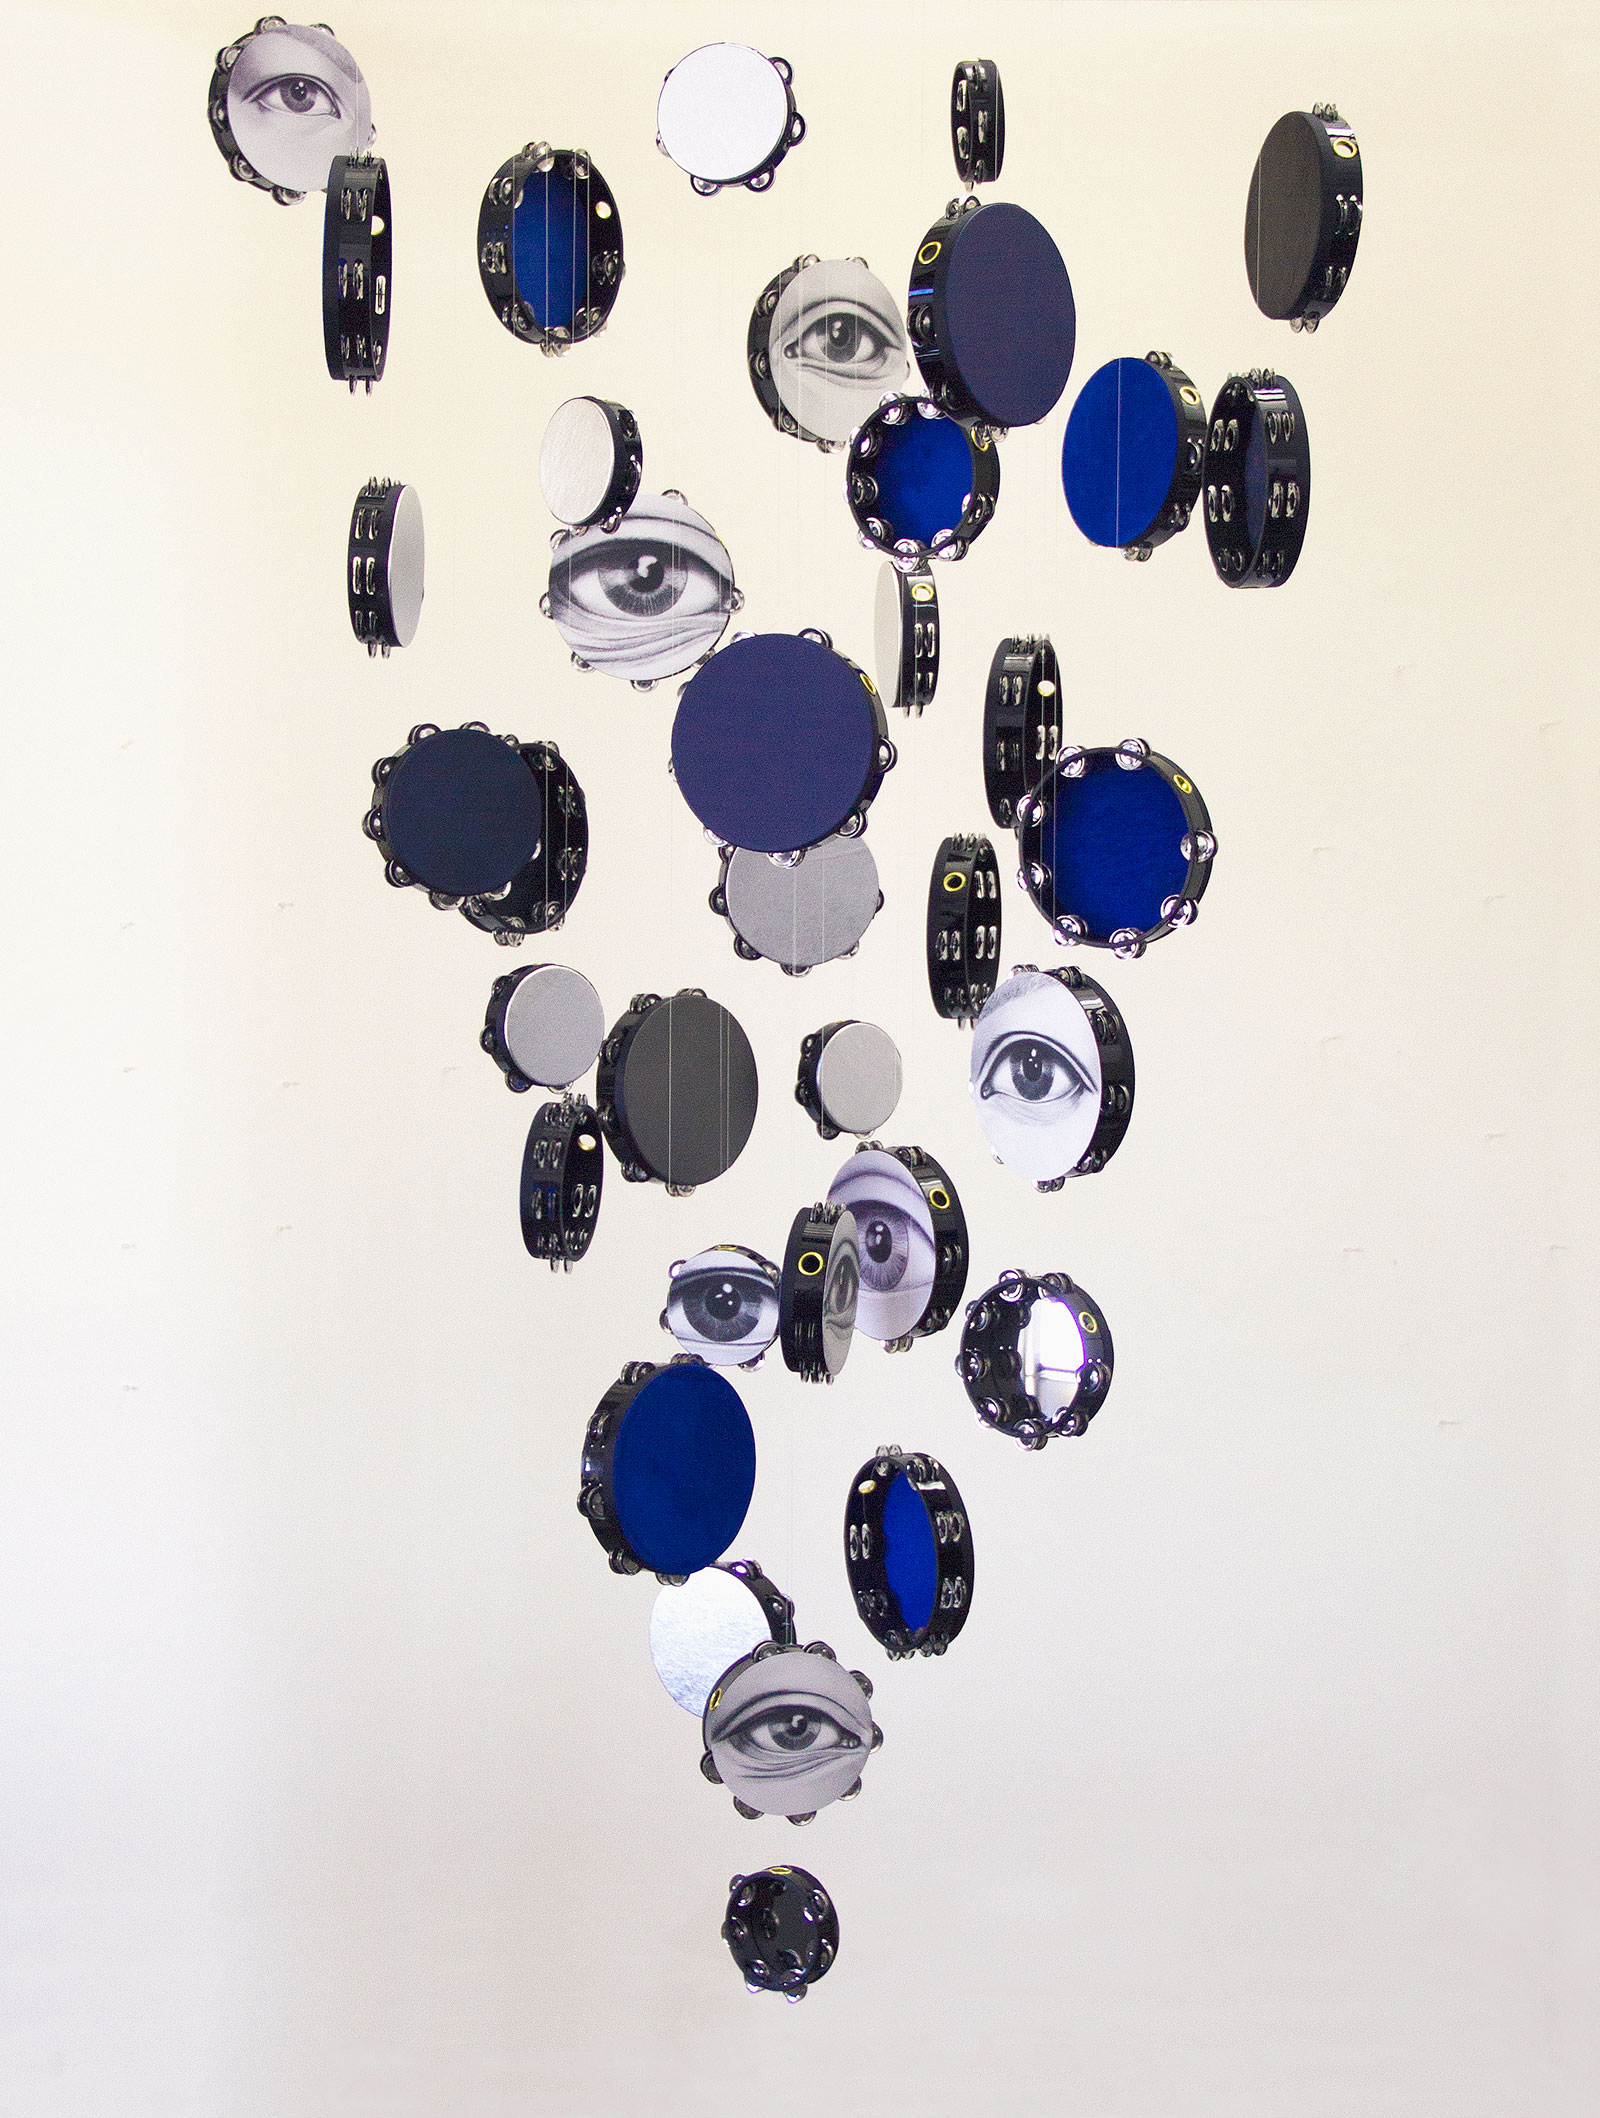 hanging tambourines with painted eyes